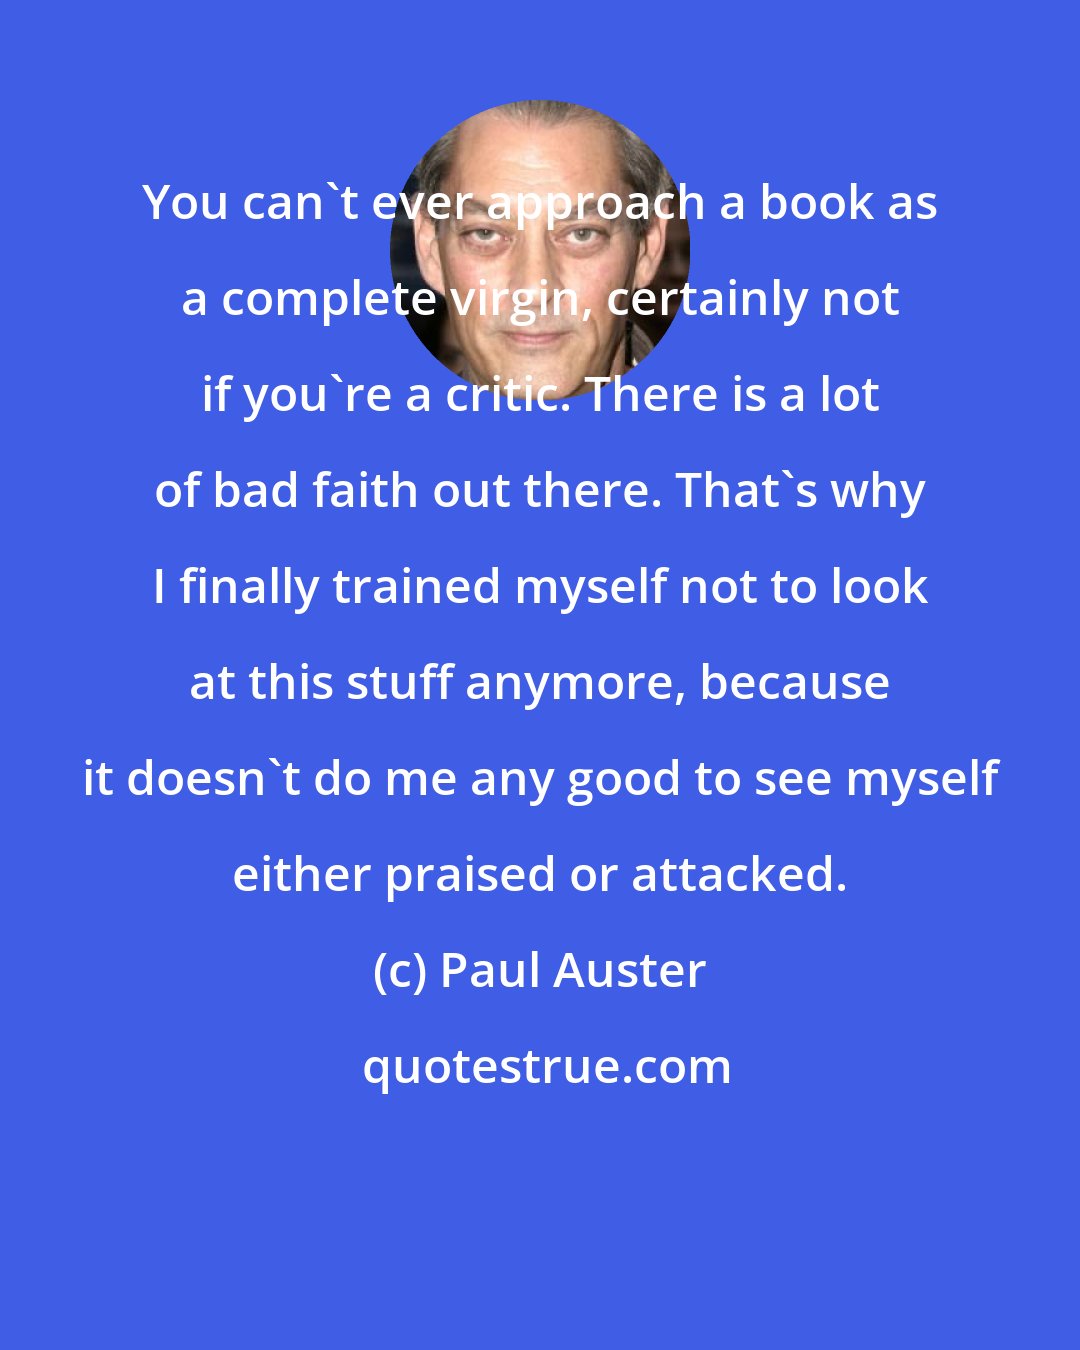 Paul Auster: You can't ever approach a book as a complete virgin, certainly not if you're a critic. There is a lot of bad faith out there. That's why I finally trained myself not to look at this stuff anymore, because it doesn't do me any good to see myself either praised or attacked.